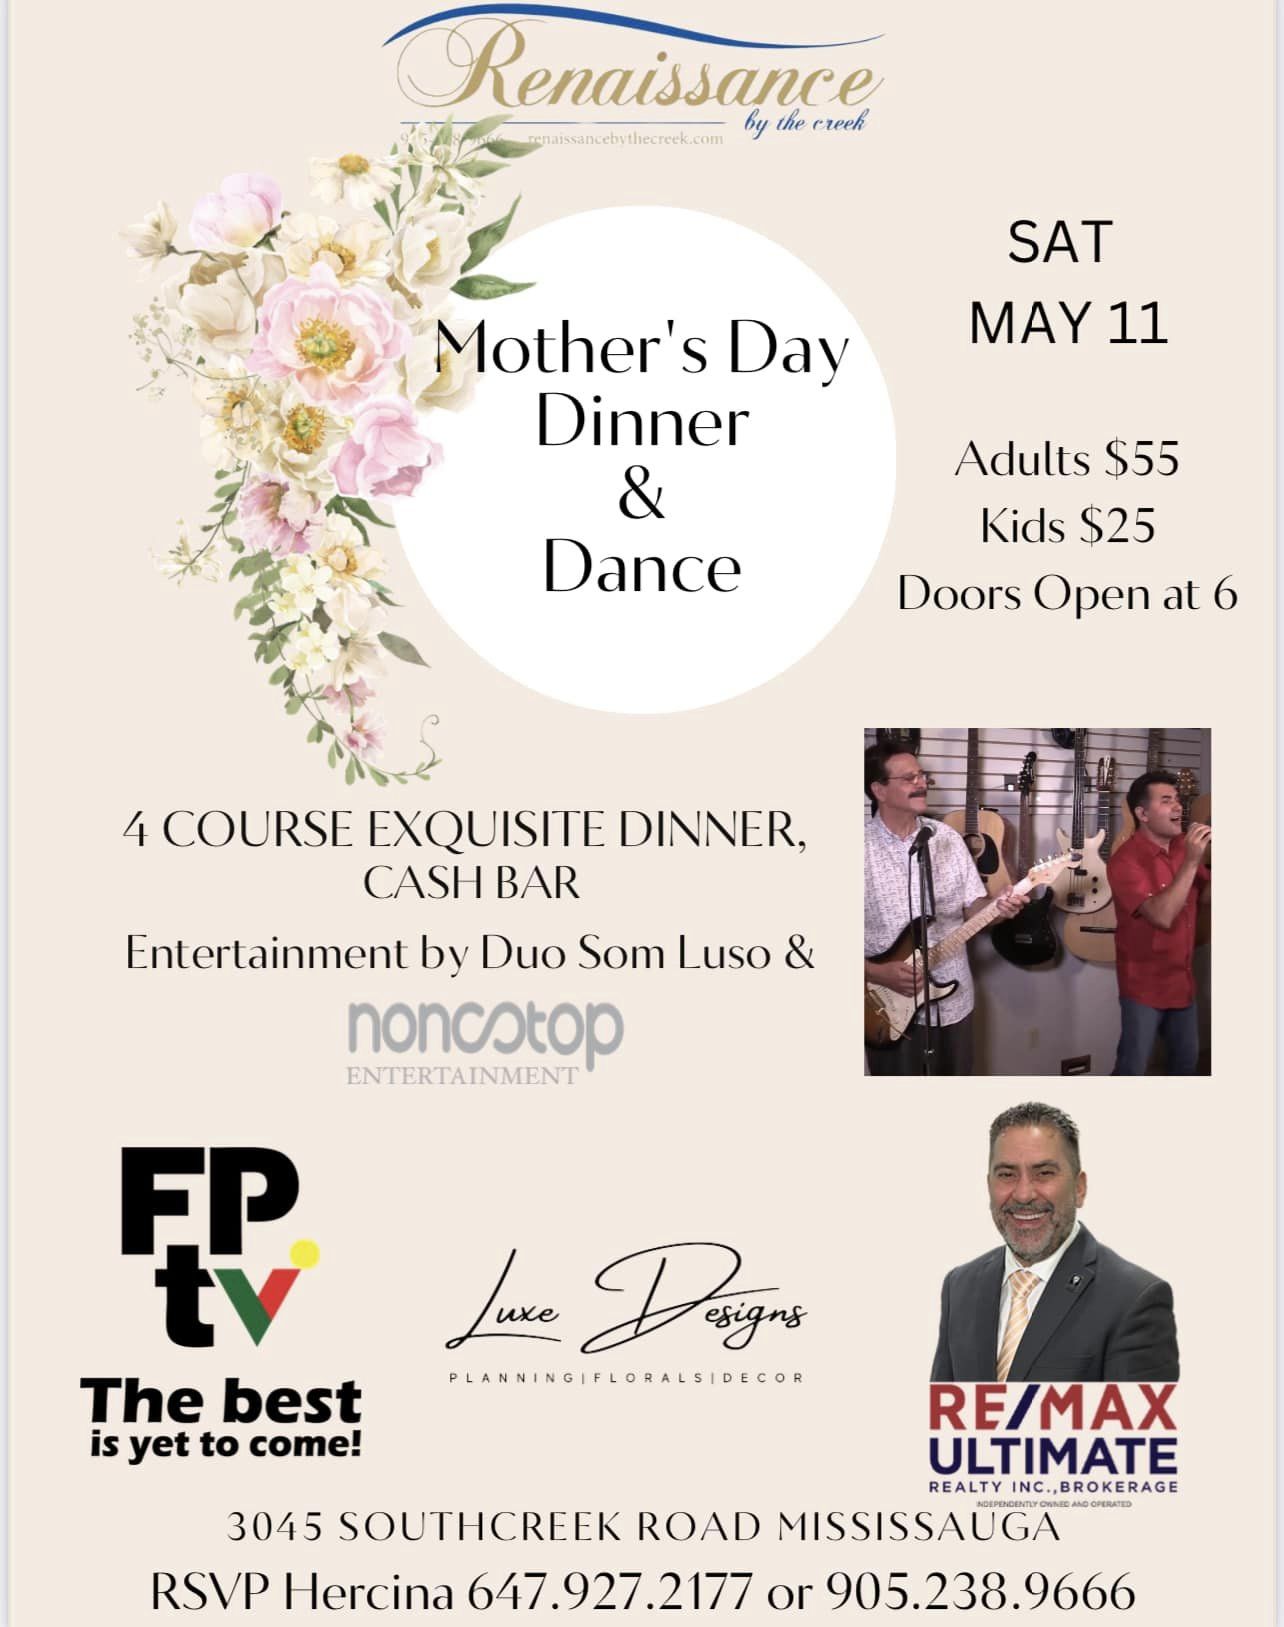 Event poster for Mother’s Day Dance at Renaissance by the Creek, featuring a performance by Jorge Amado.